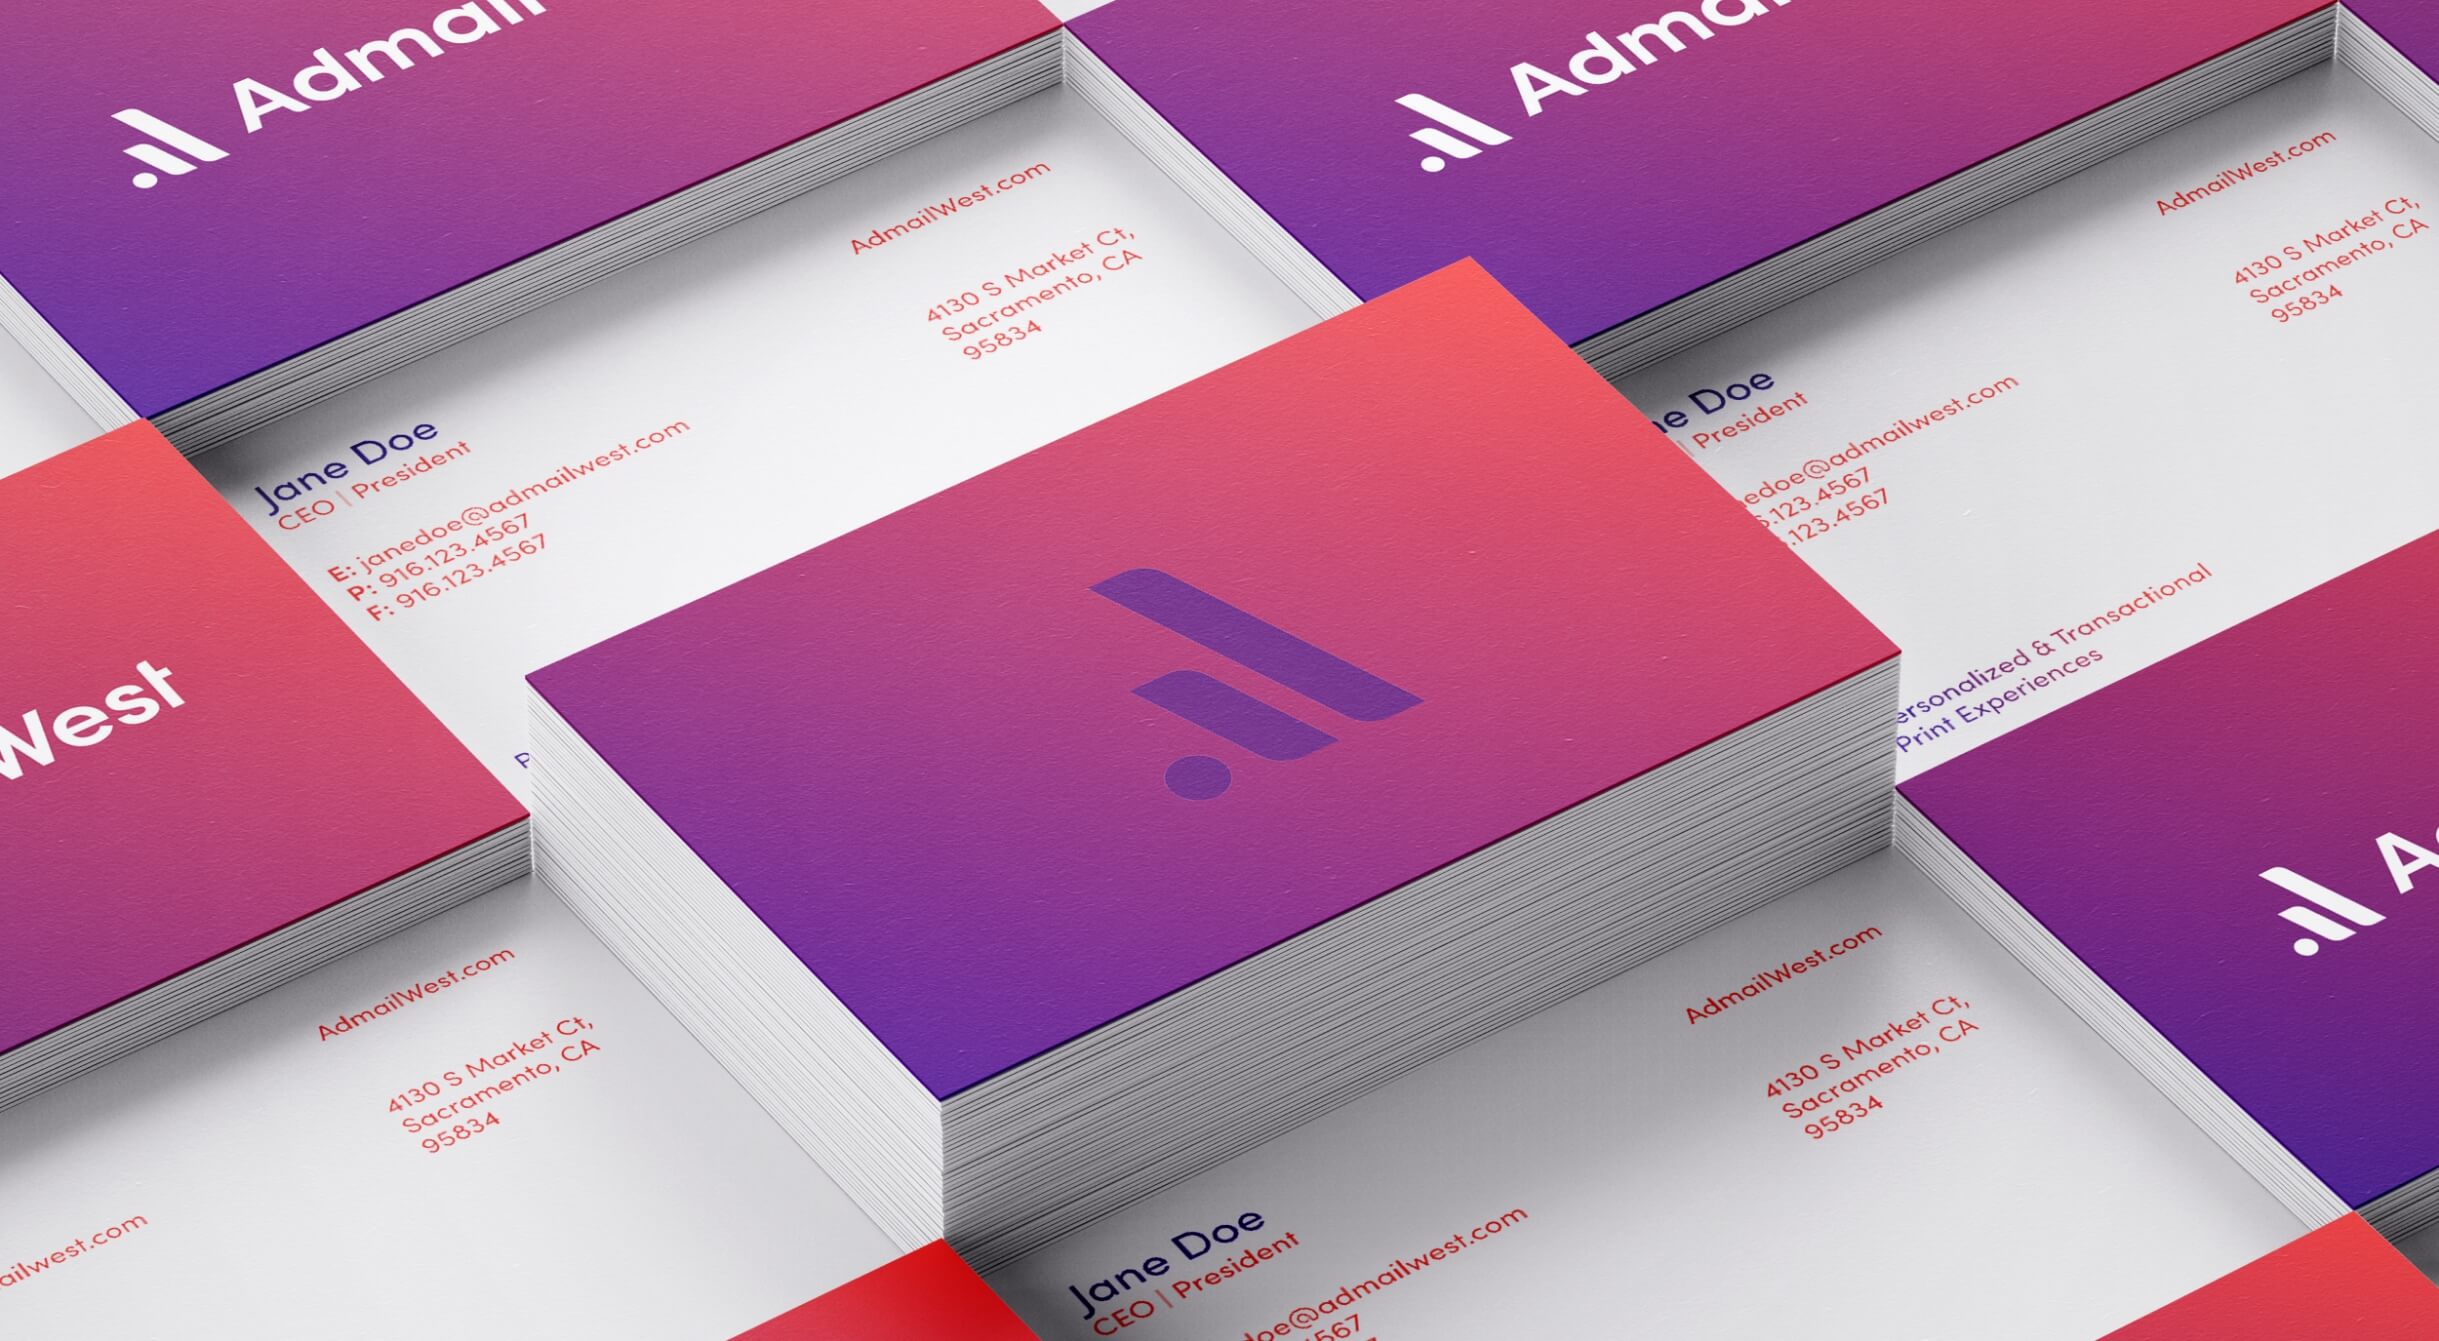 Admail West business cards